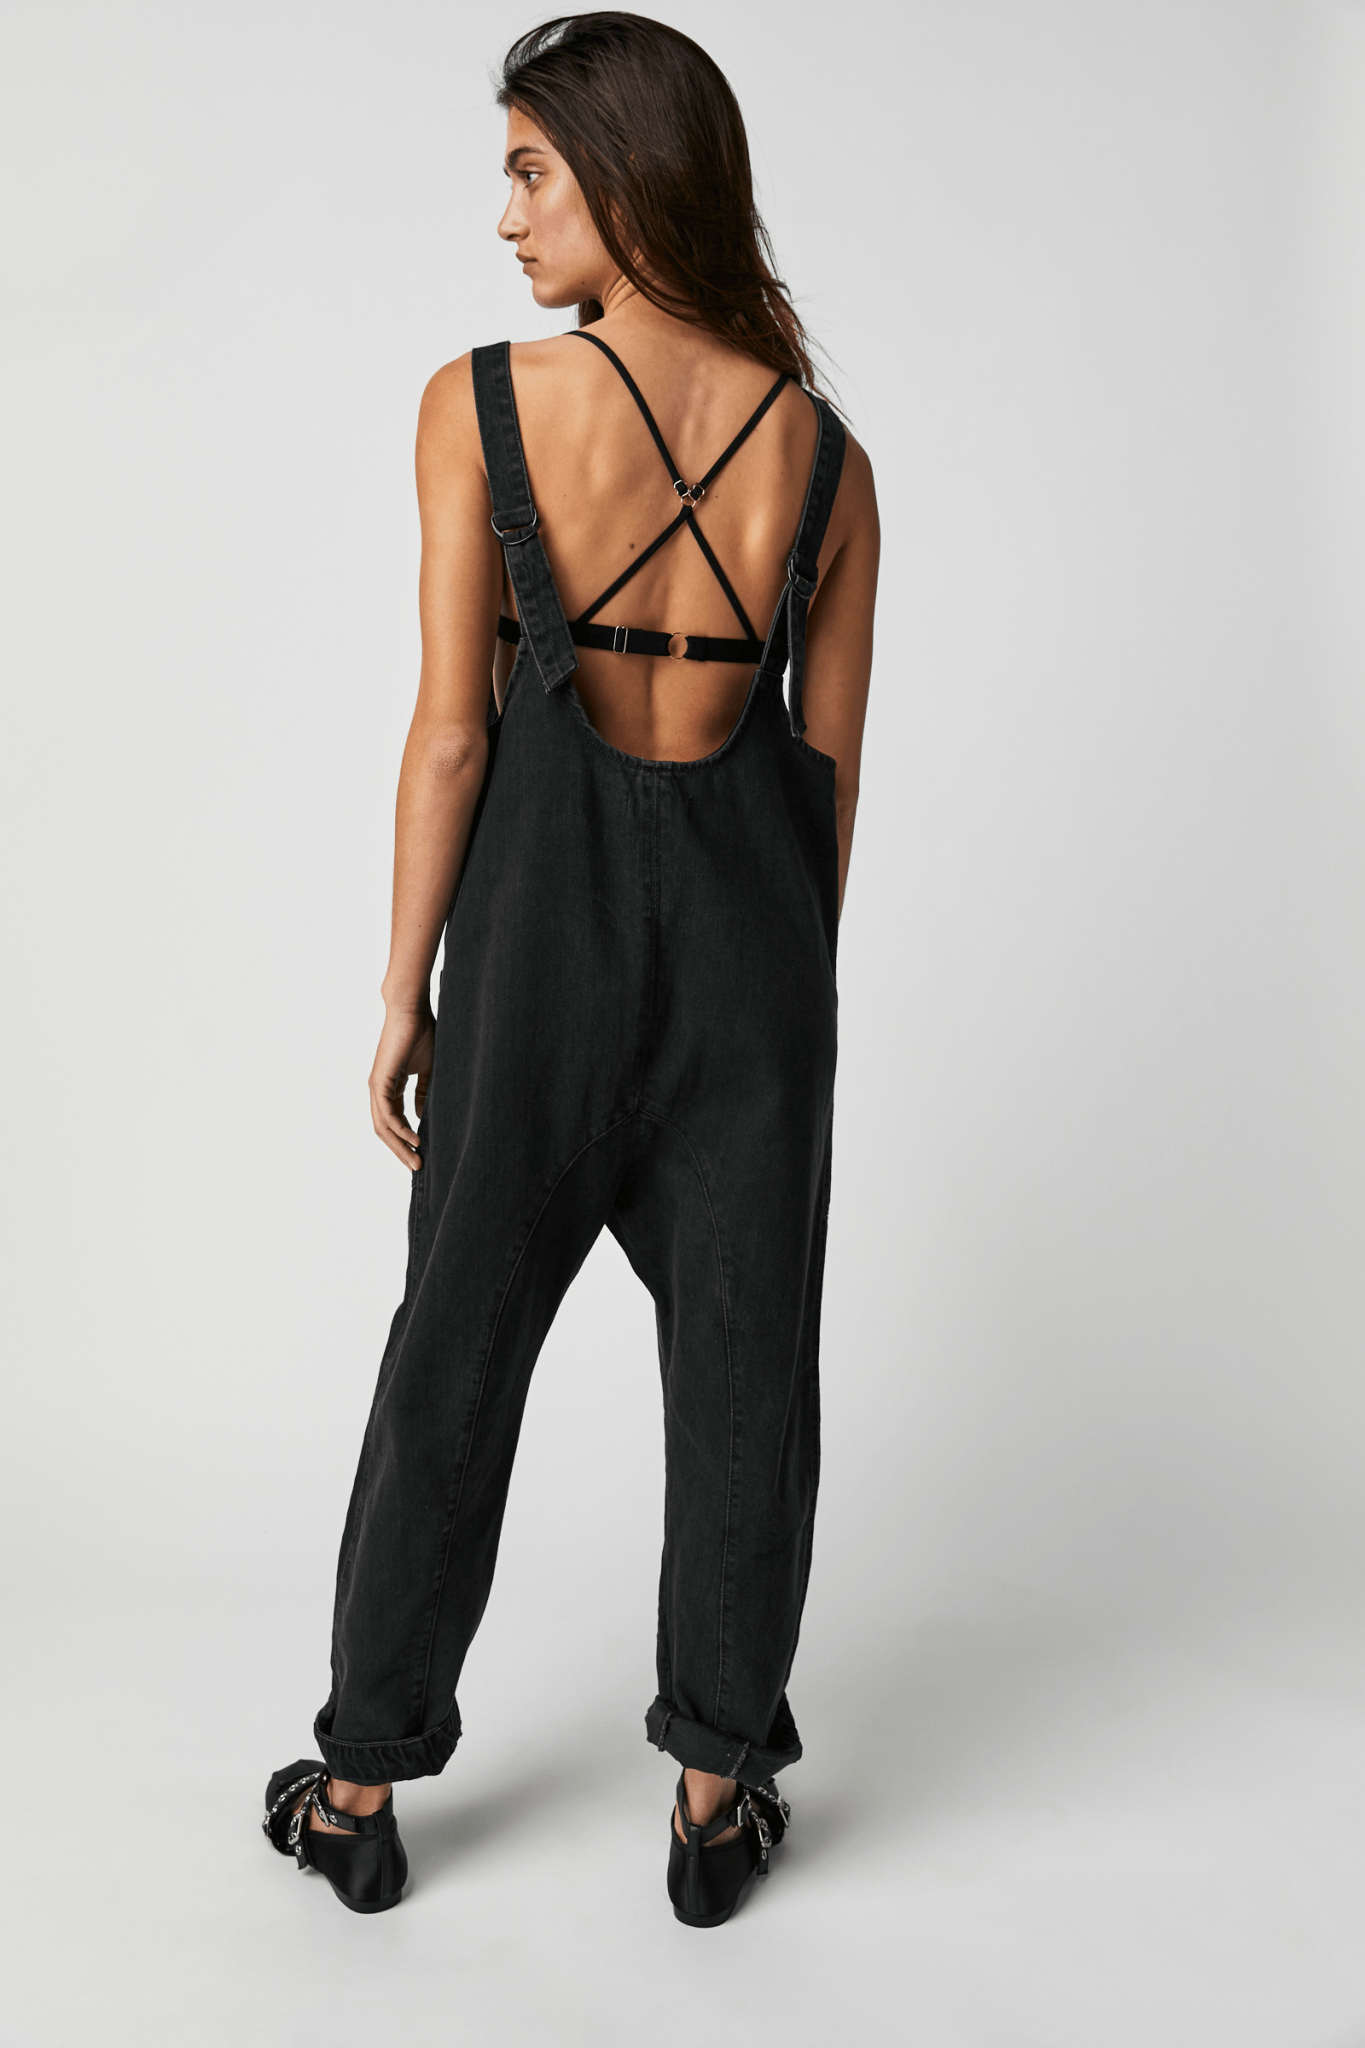 High Roller Jumpsuit by Free People - Mineral Black - Blue Sky Fashions & Lingerie